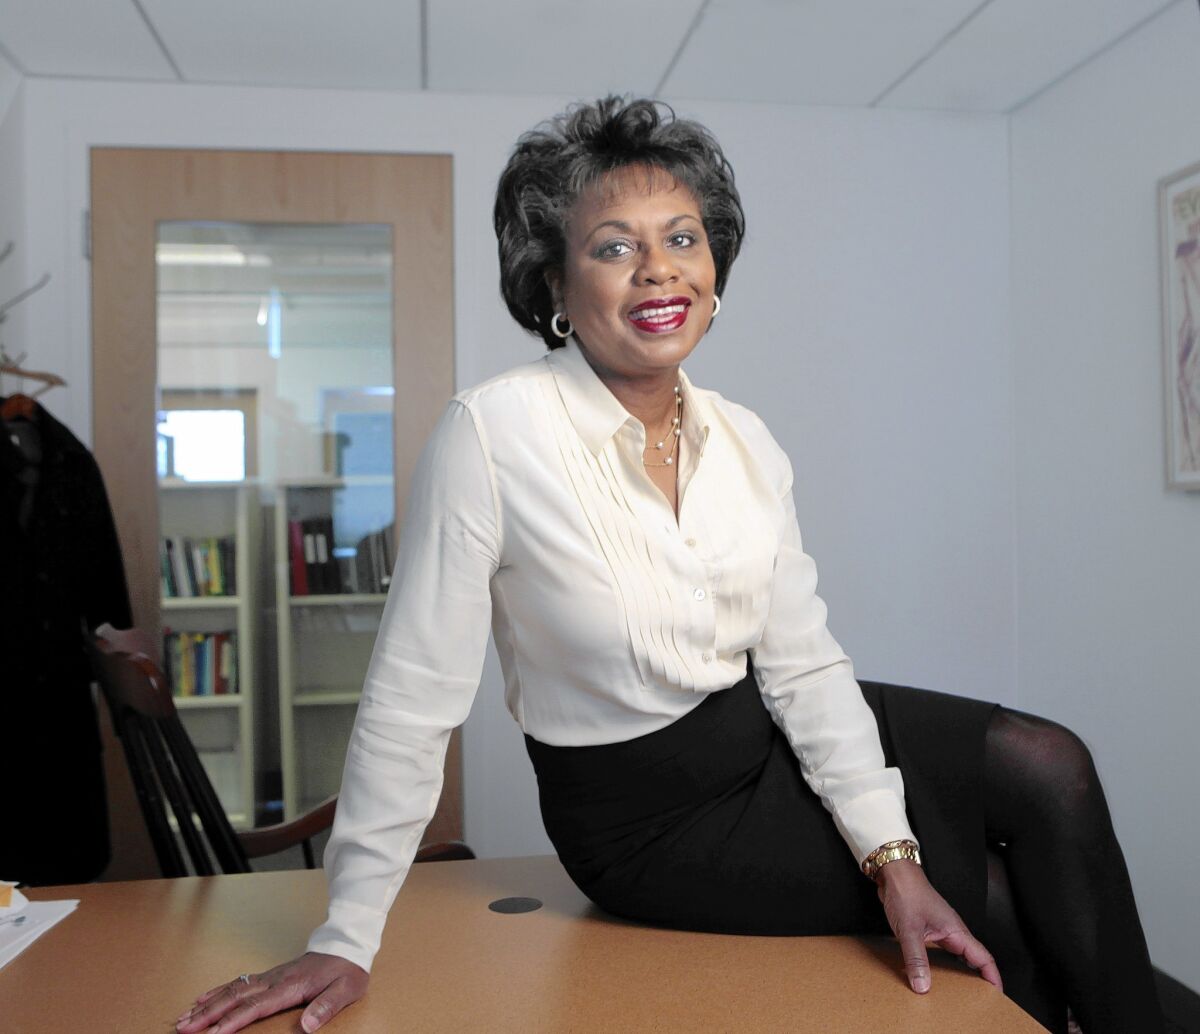 Brandeis University law professor Anita Hill is the subject of the documentary "Anita," which opened Friday in L.A. and New York.